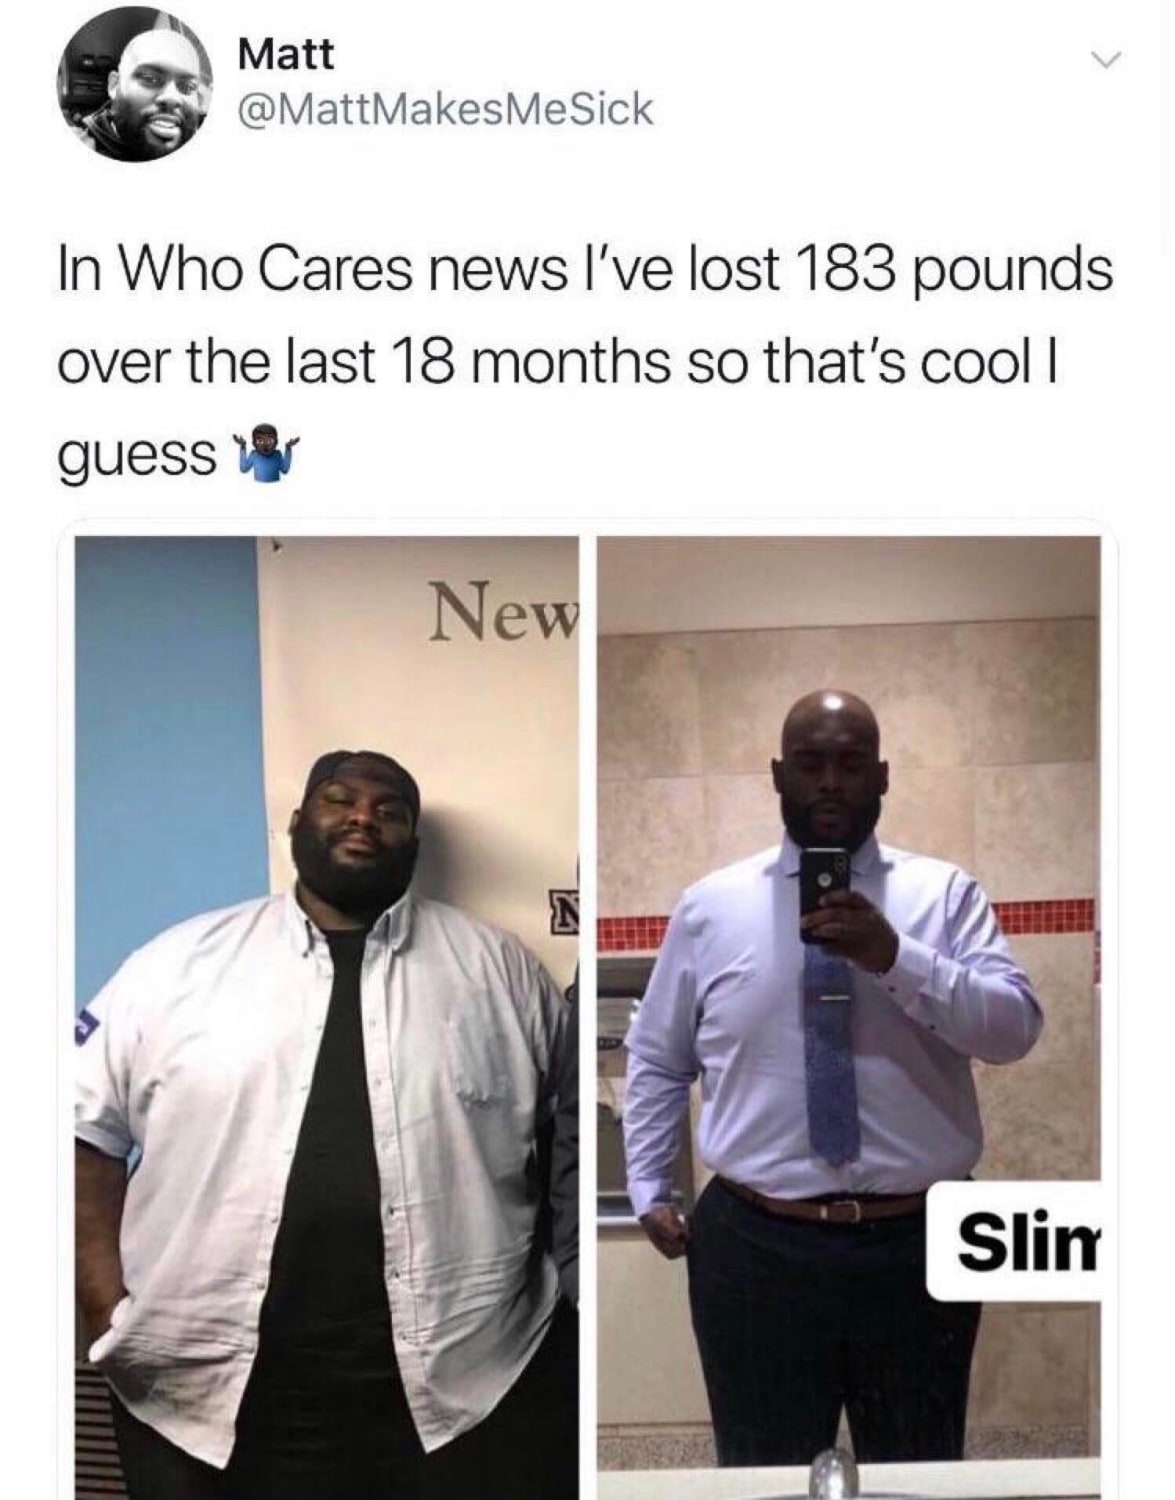 This man lost 183 pounds in 18 months!